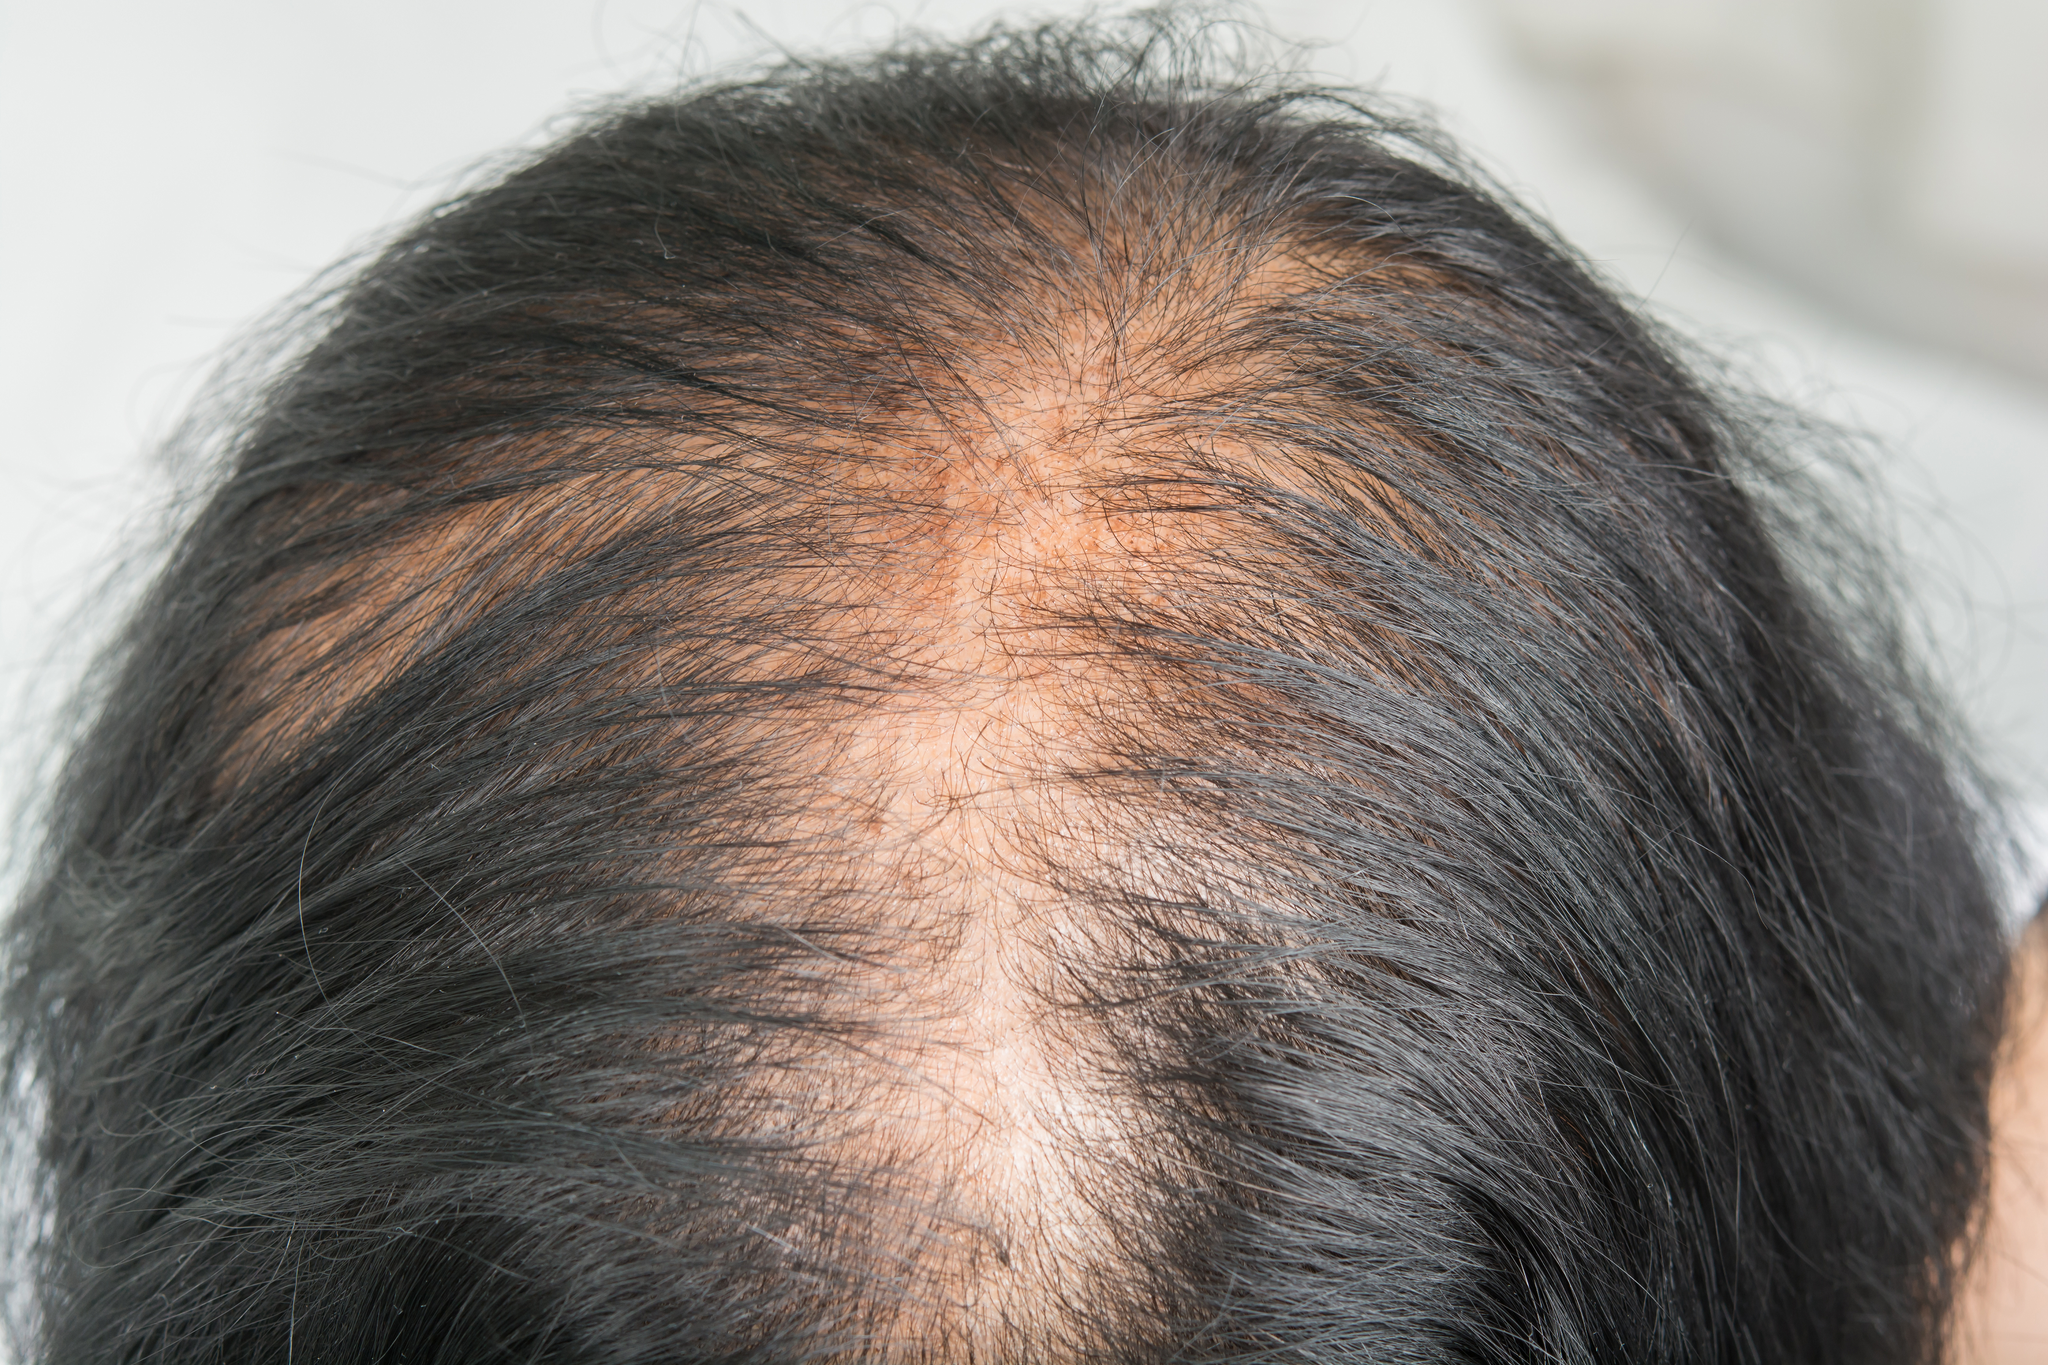 How to Prevent Dry Scalp Hair Loss